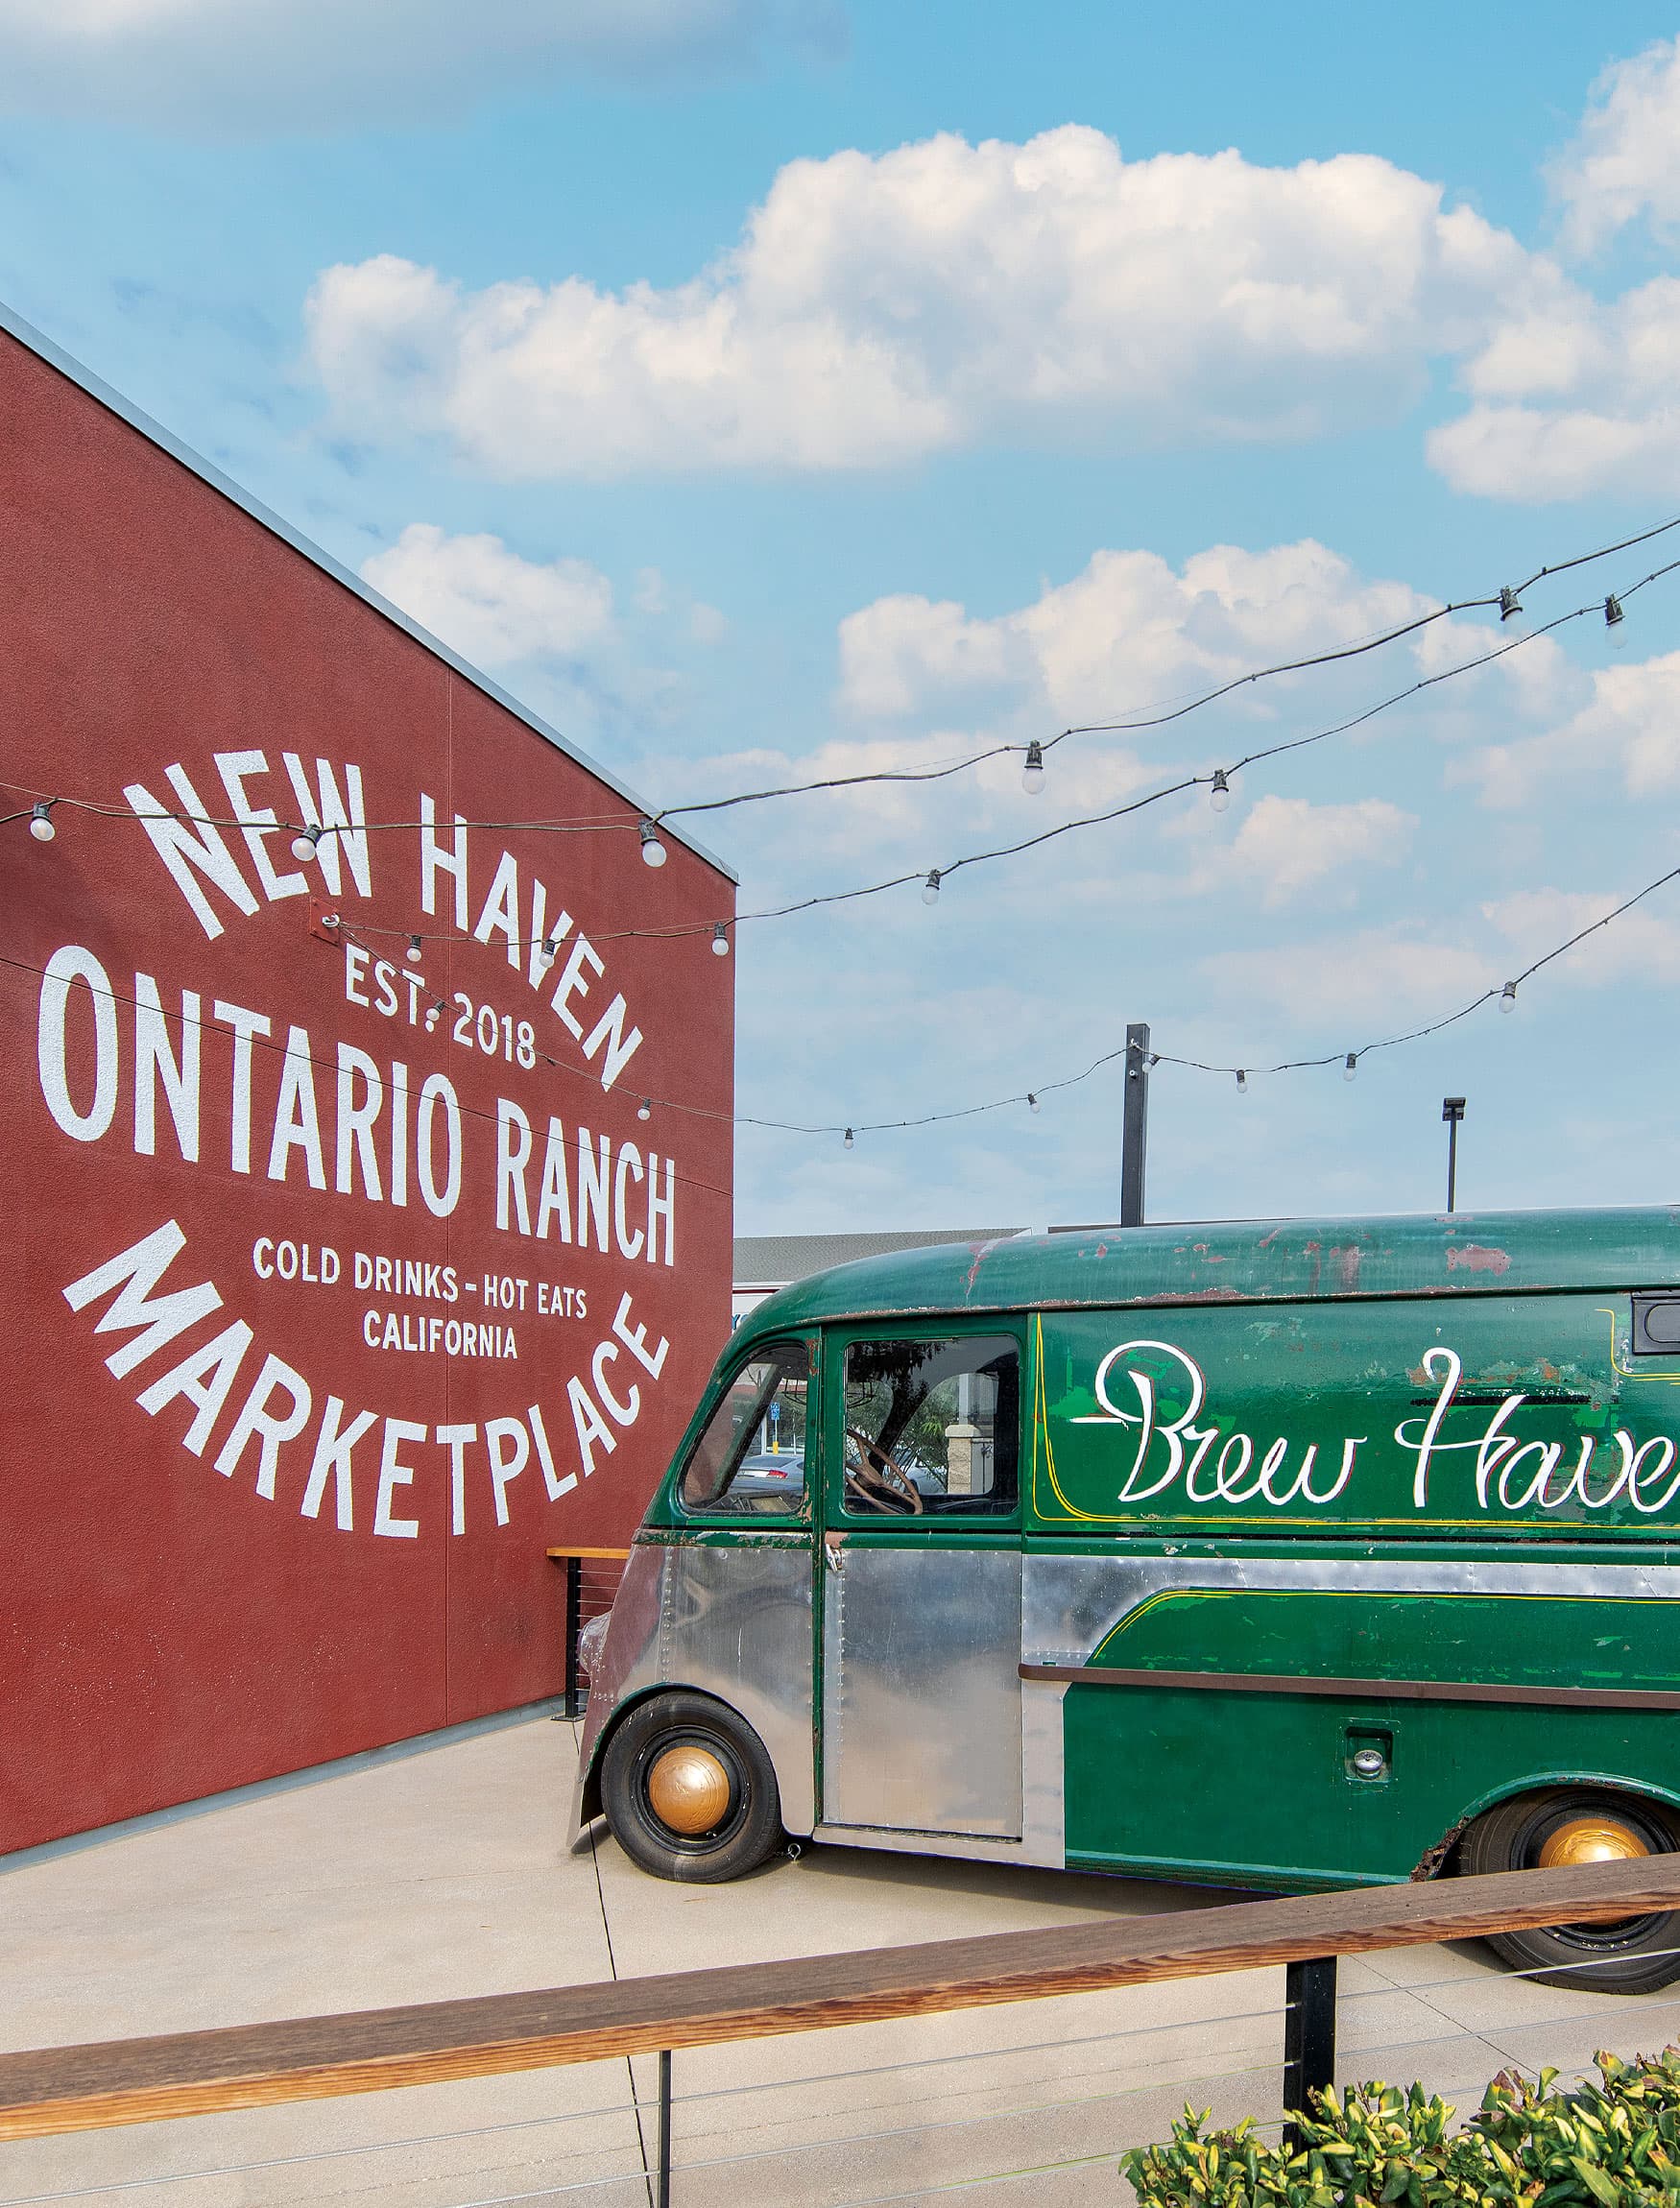 Painted mural for side of the building in New Haven Marketplace in Ontario, California. White lettering against red painted wall. Green truck with Brew Haven cursive font.